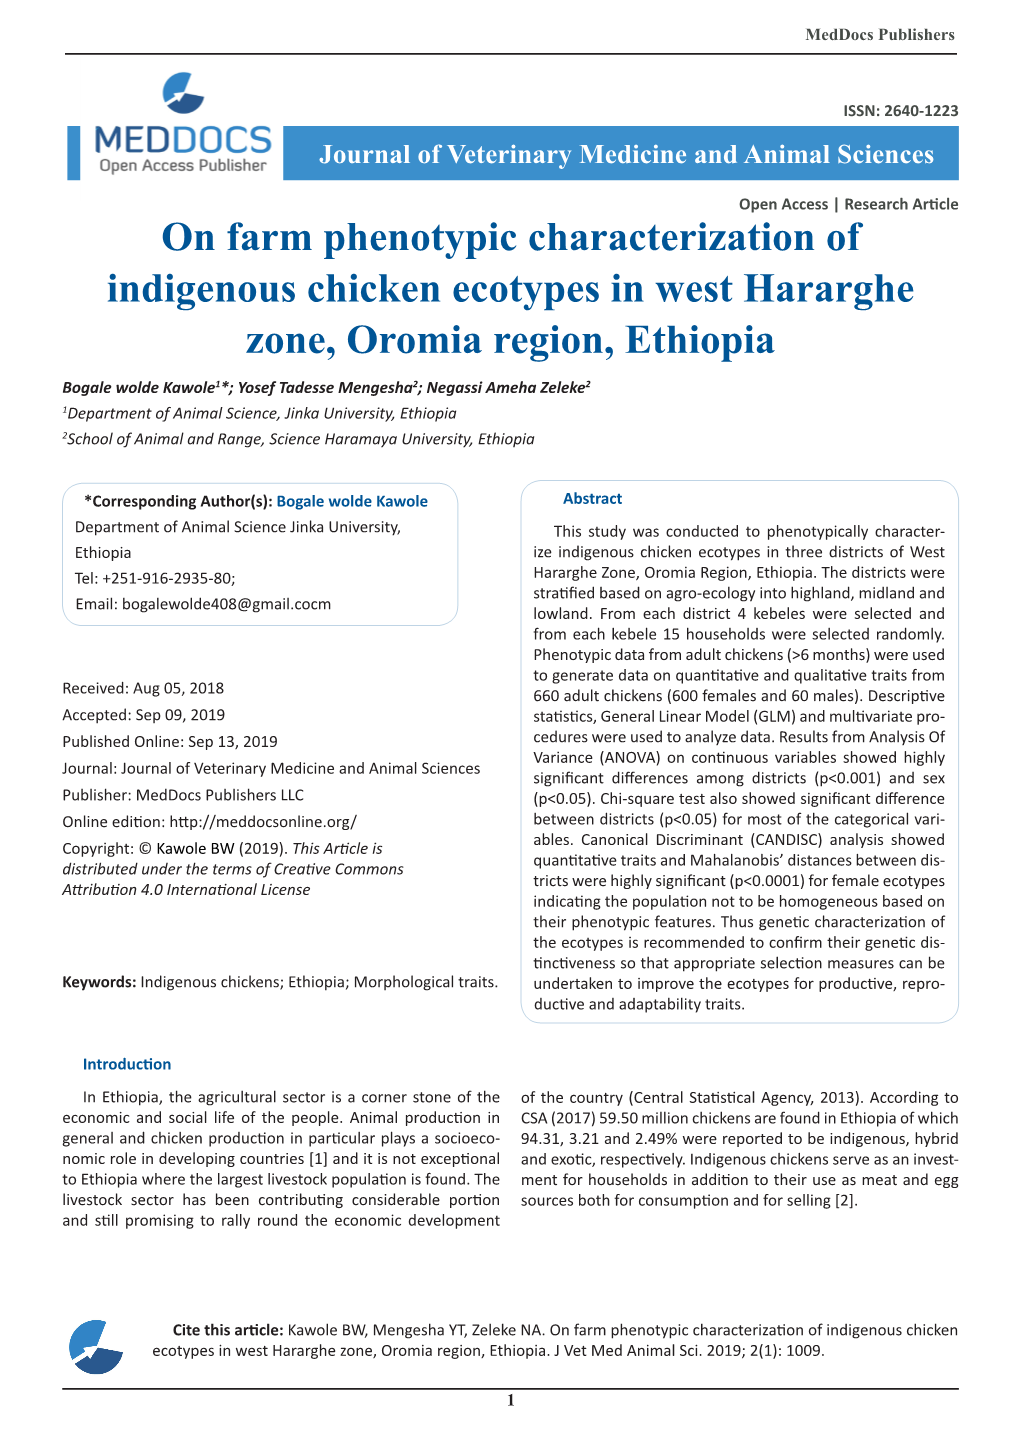 On Farm Phenotypic Characterization of Indigenous Chicken Ecotypes In